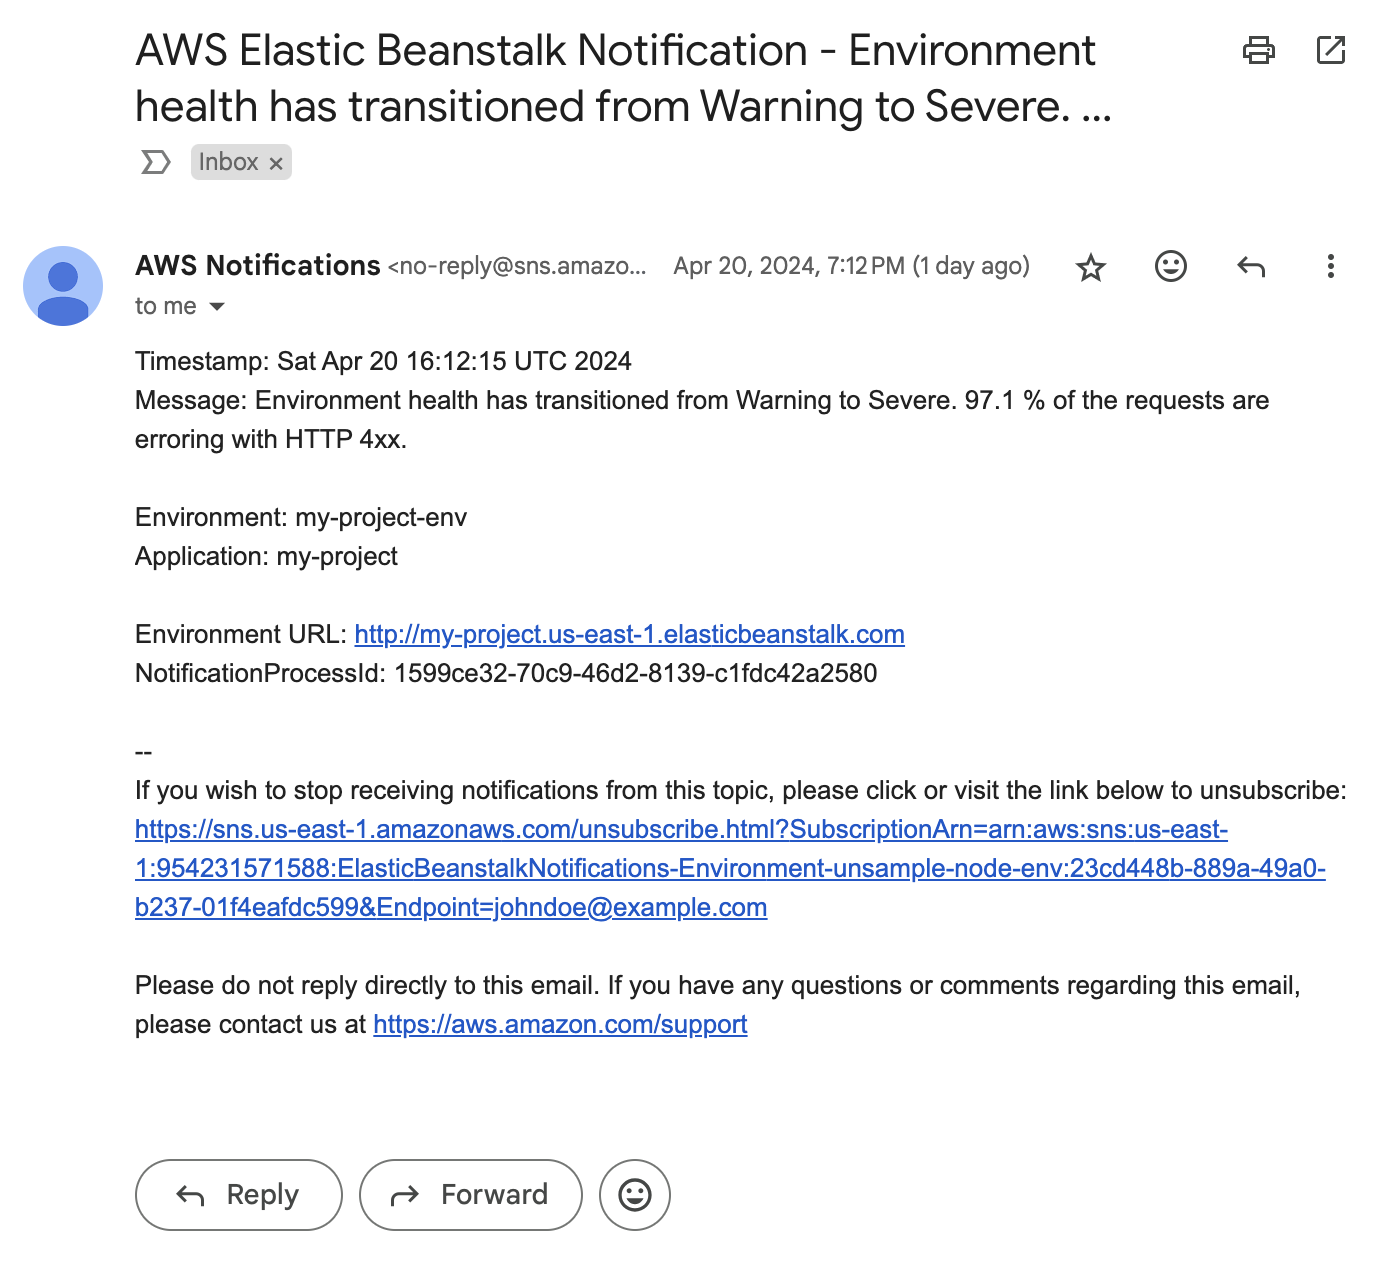 Gmail visualization of an AWS Elastic Beanstalk environment update email.